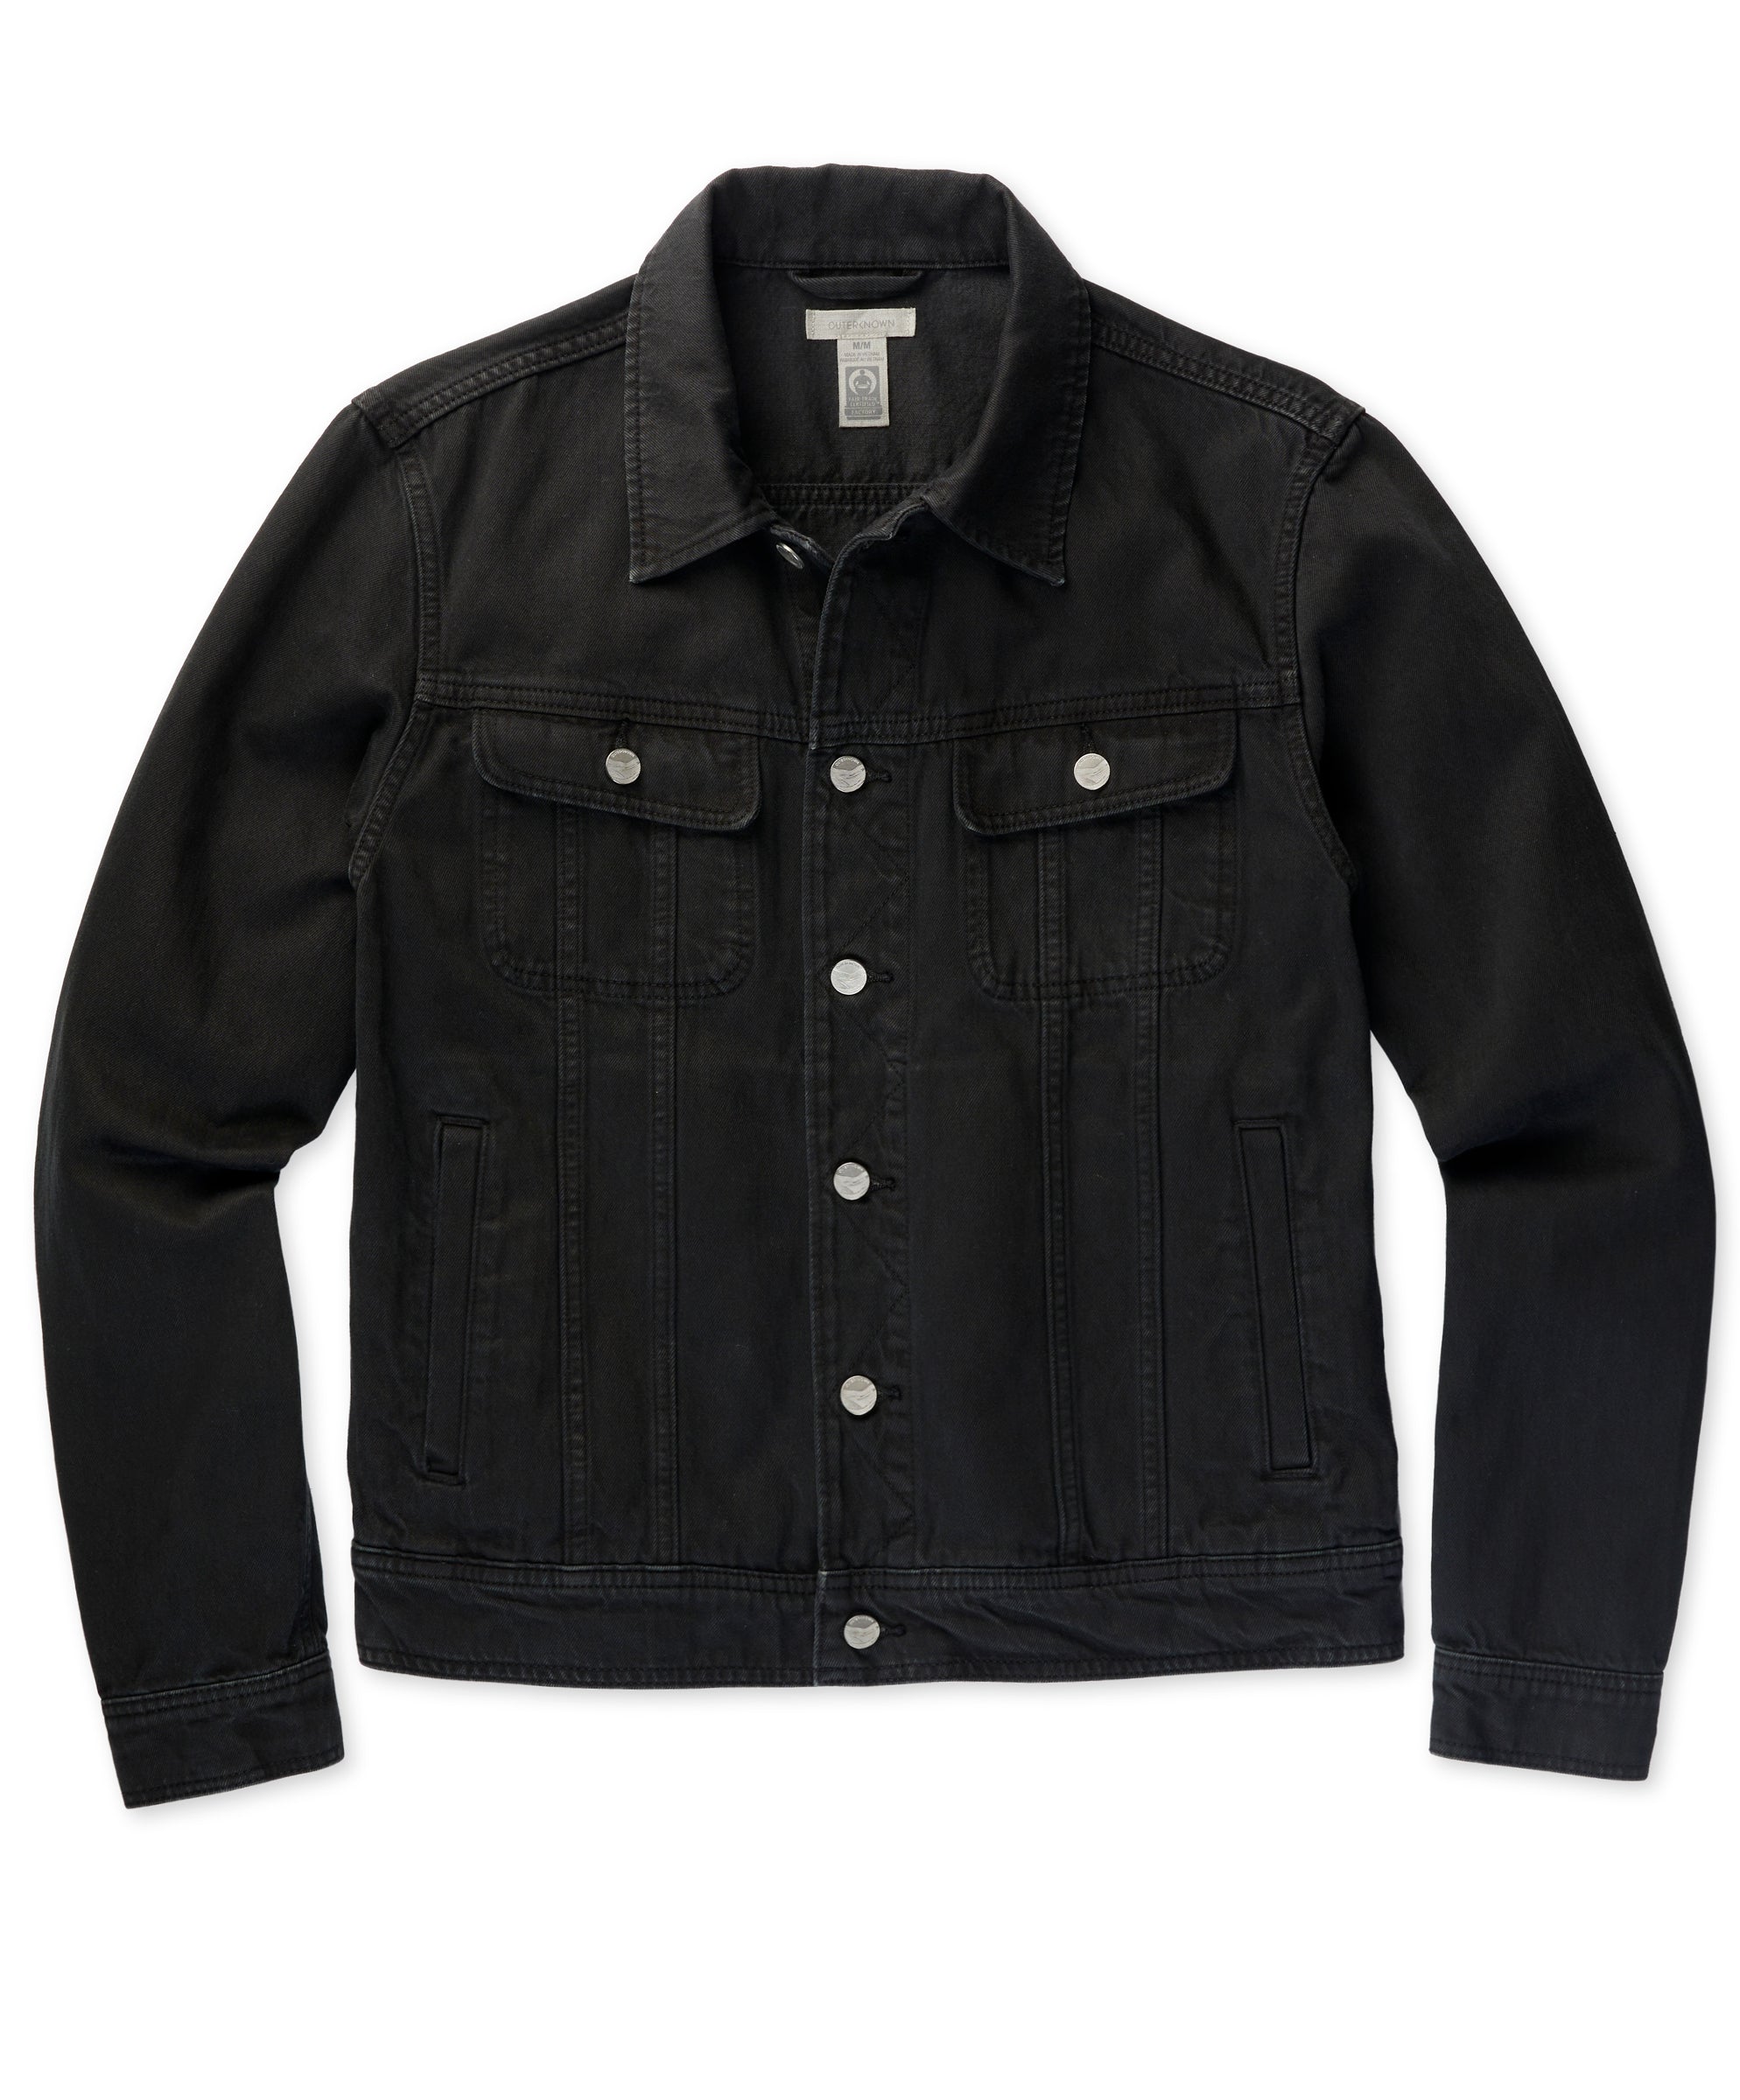 Thread & Supply Denim Trucker Jacket (Extended Sizes Available) at